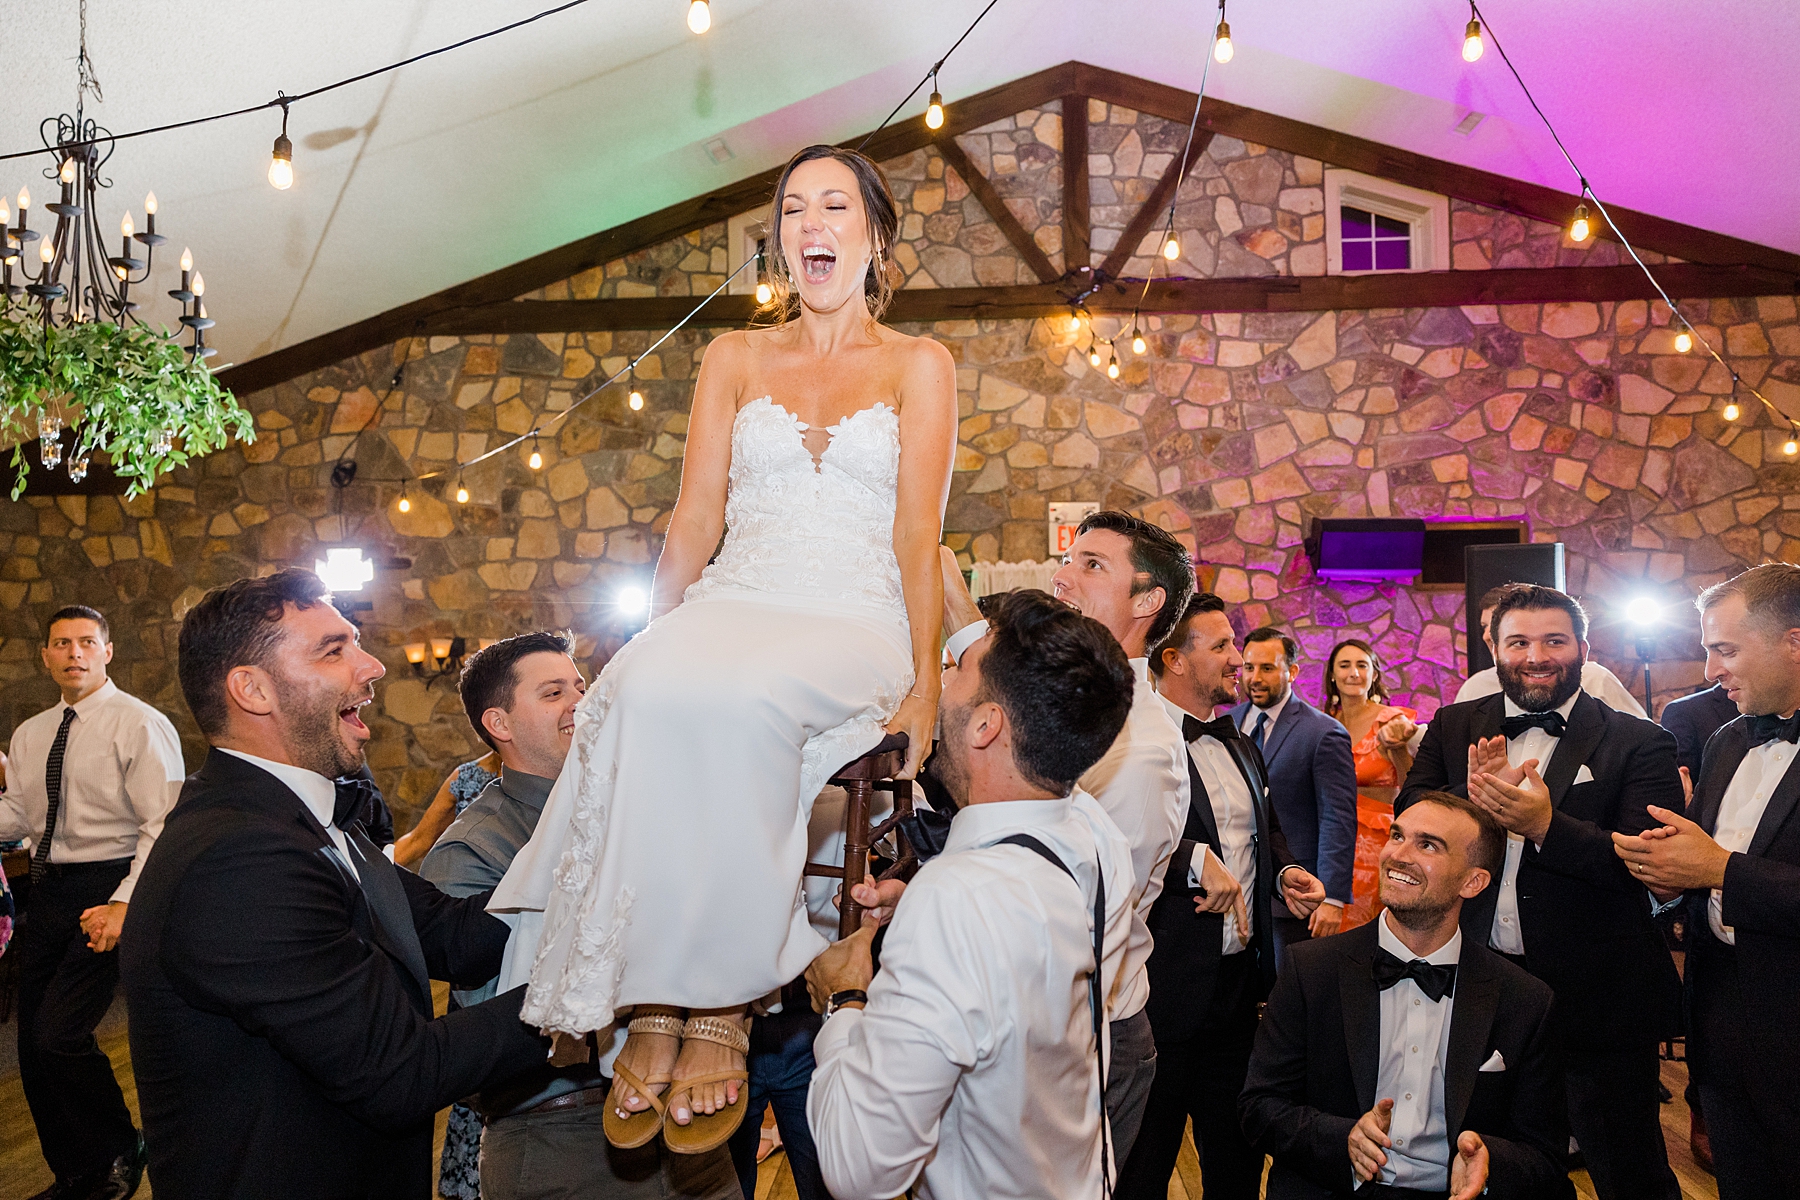 bride is lifted up on chair by groomsmen at reception 